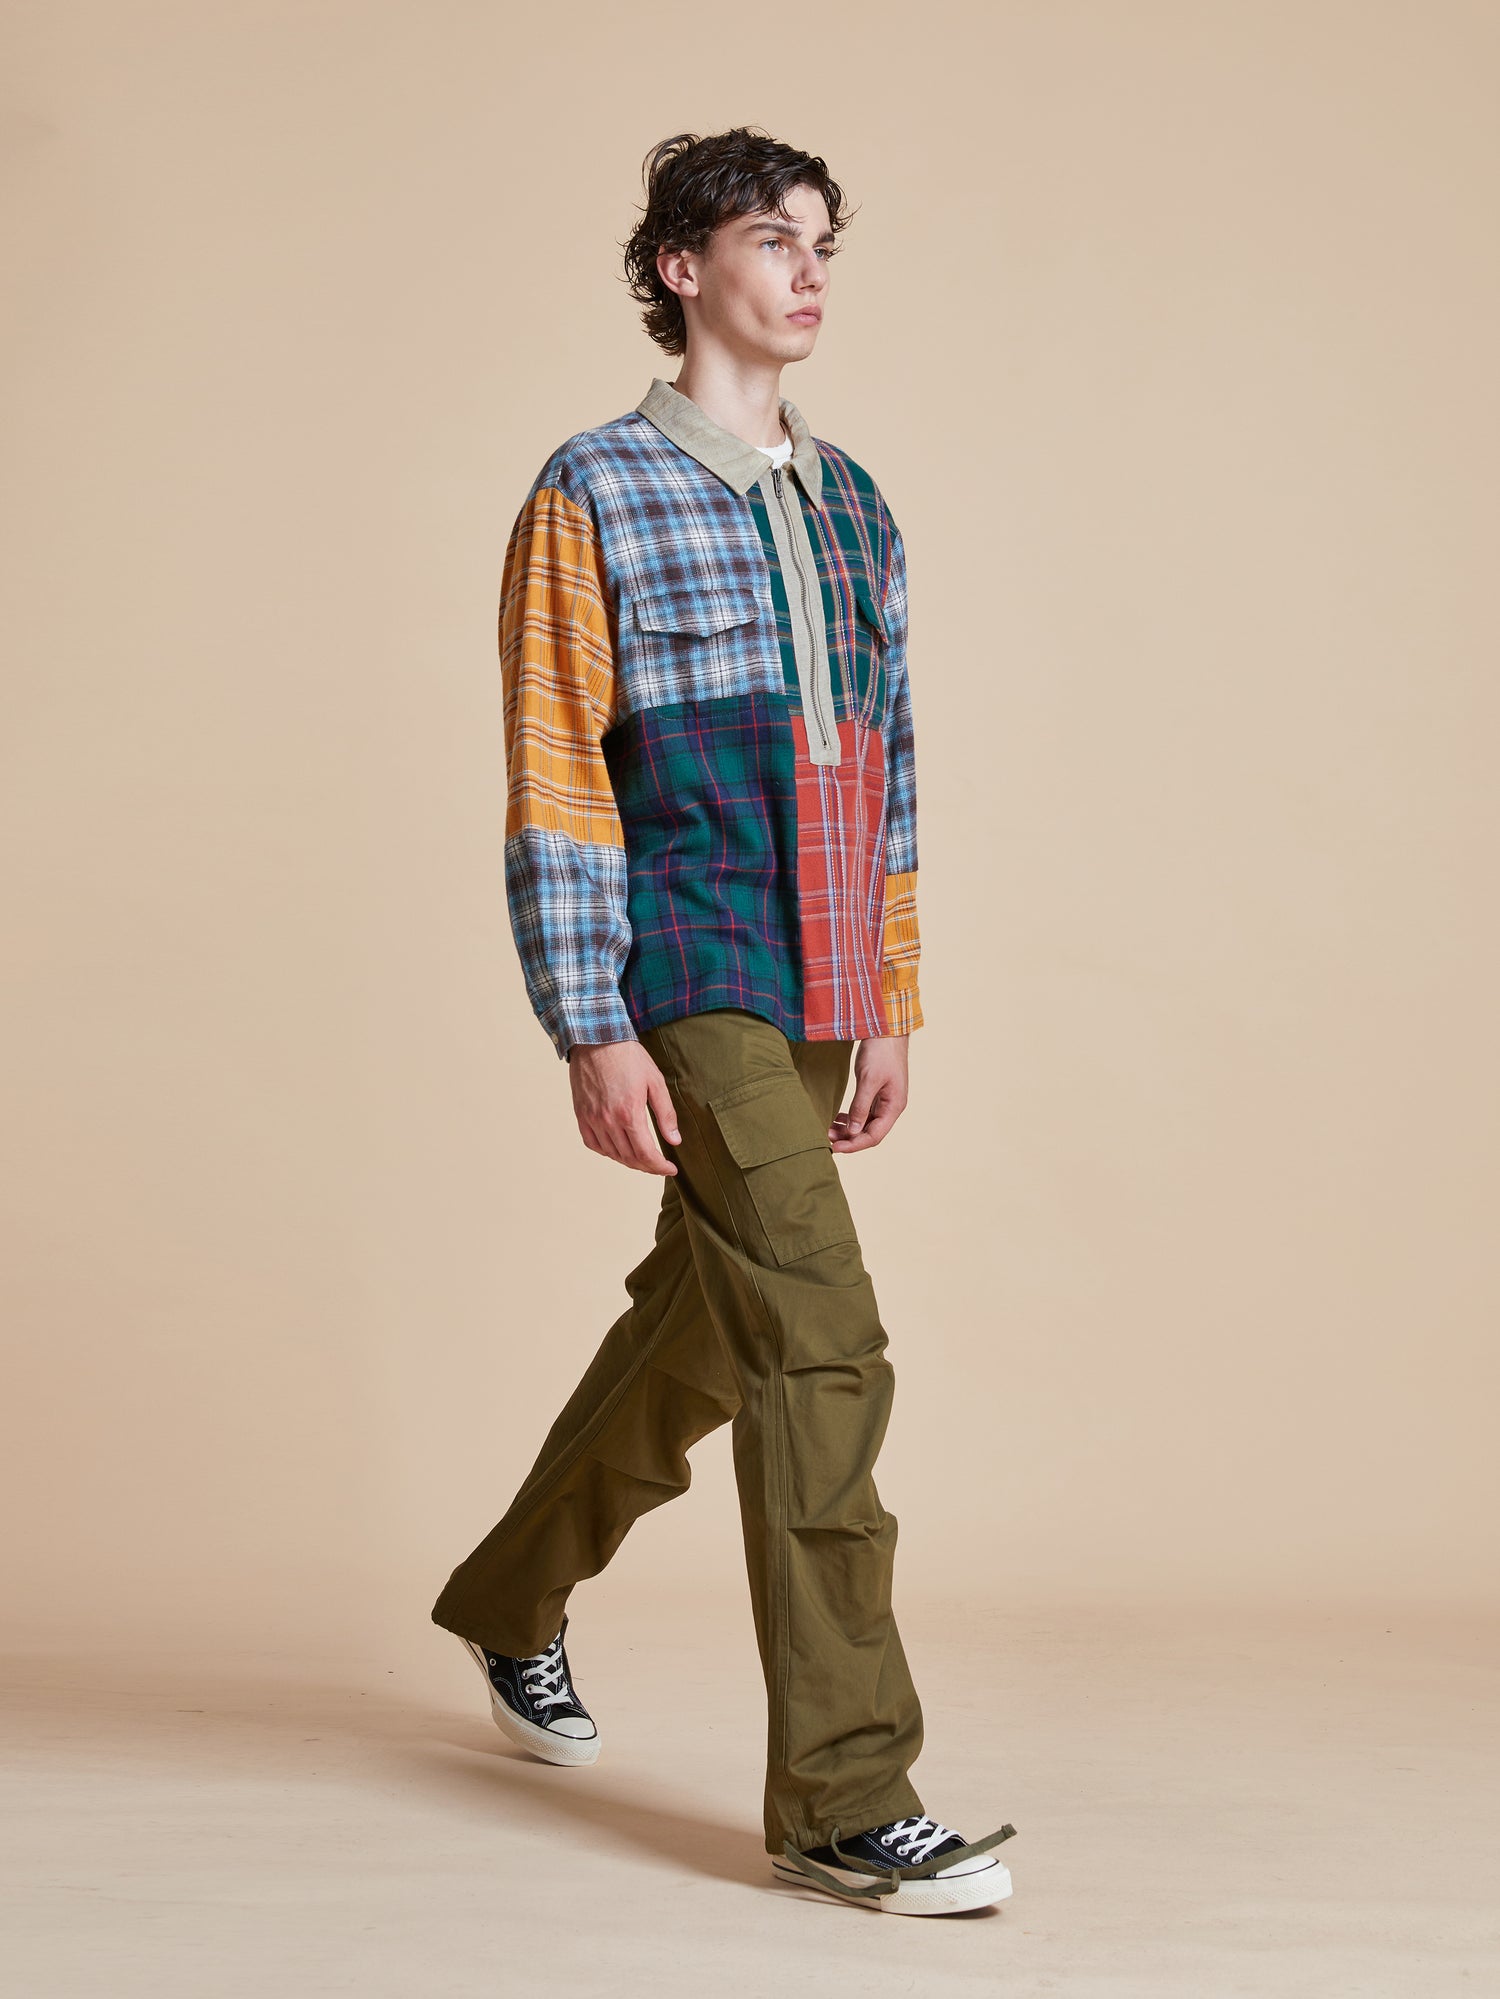 A man wearing a Found Multi Plaid Tartan Shirt and pants walking on a beige background.